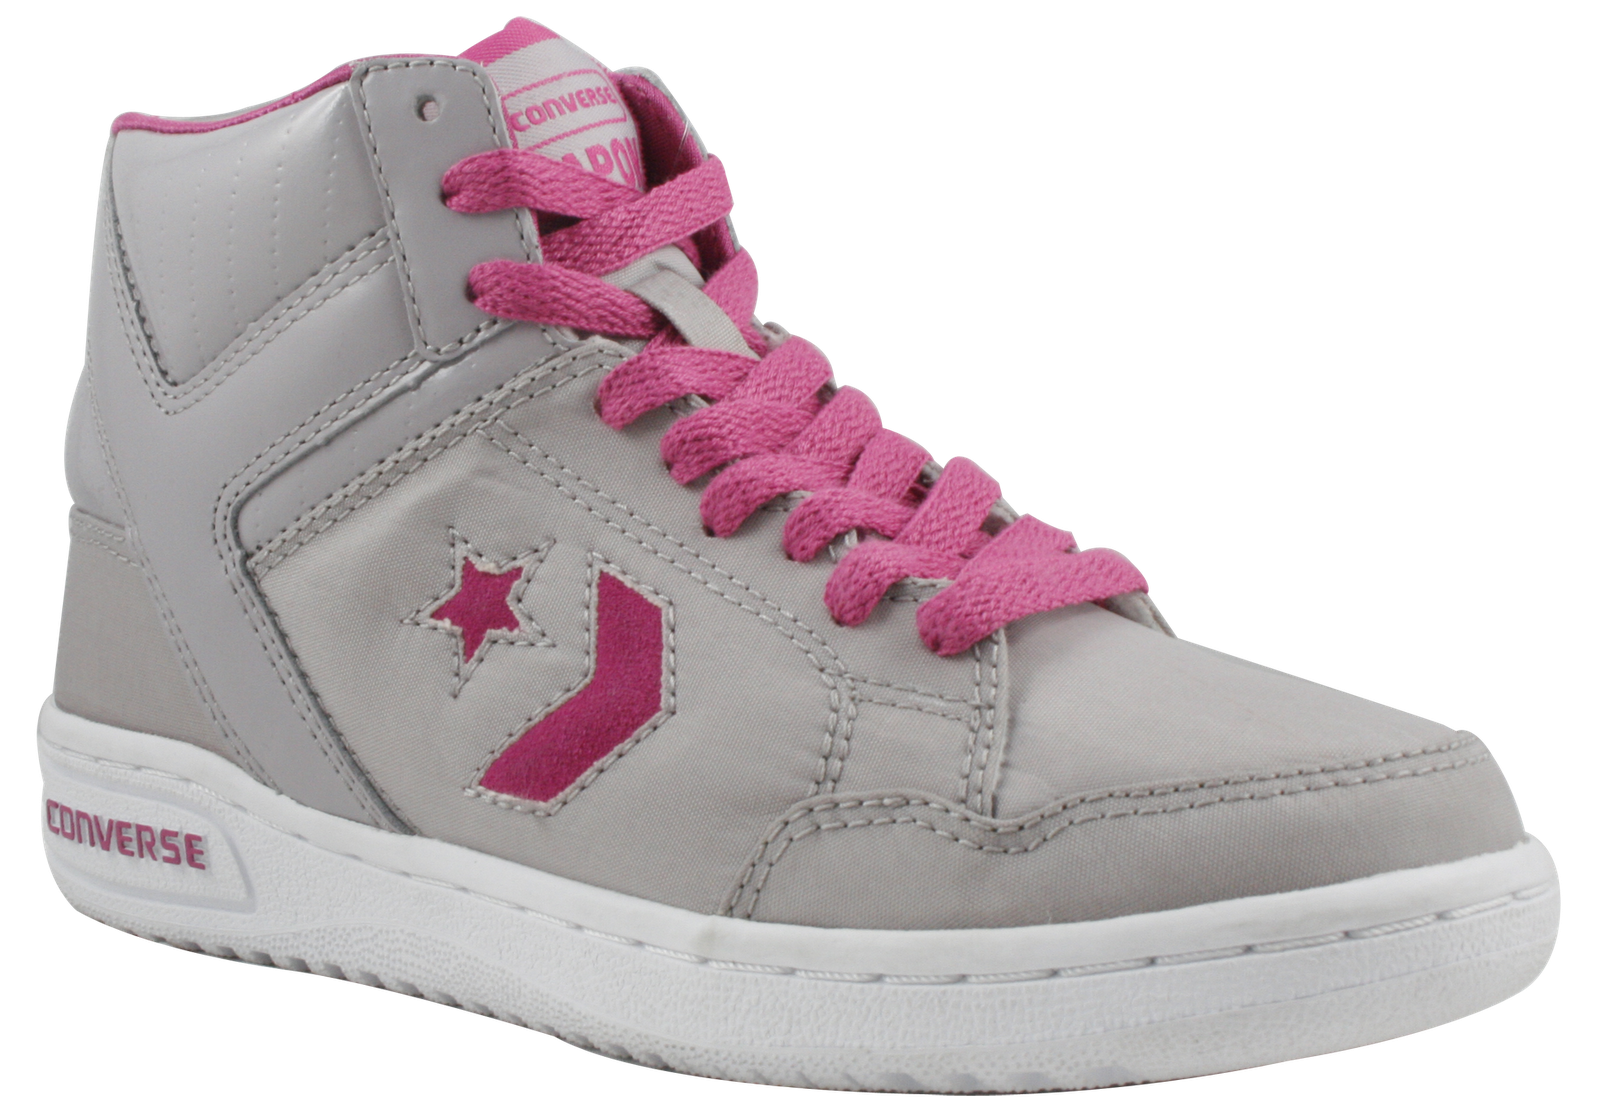 Converse Shoes For Girls Philippines